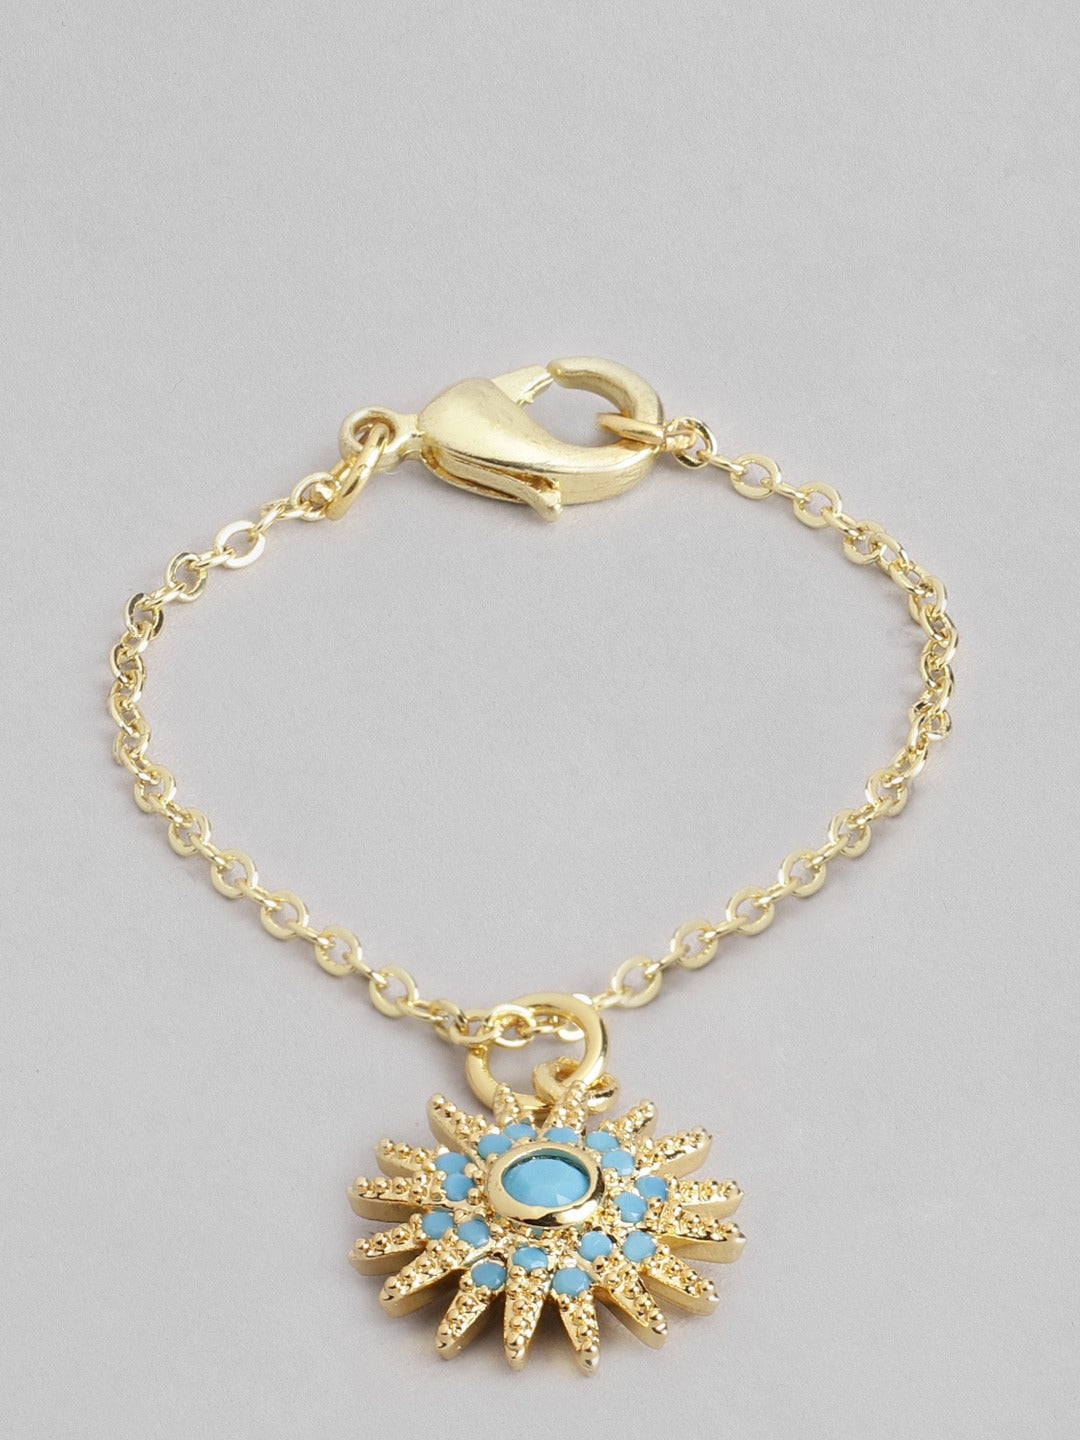 Blueberry gold plated Evil Eye bracelet and Watch charm